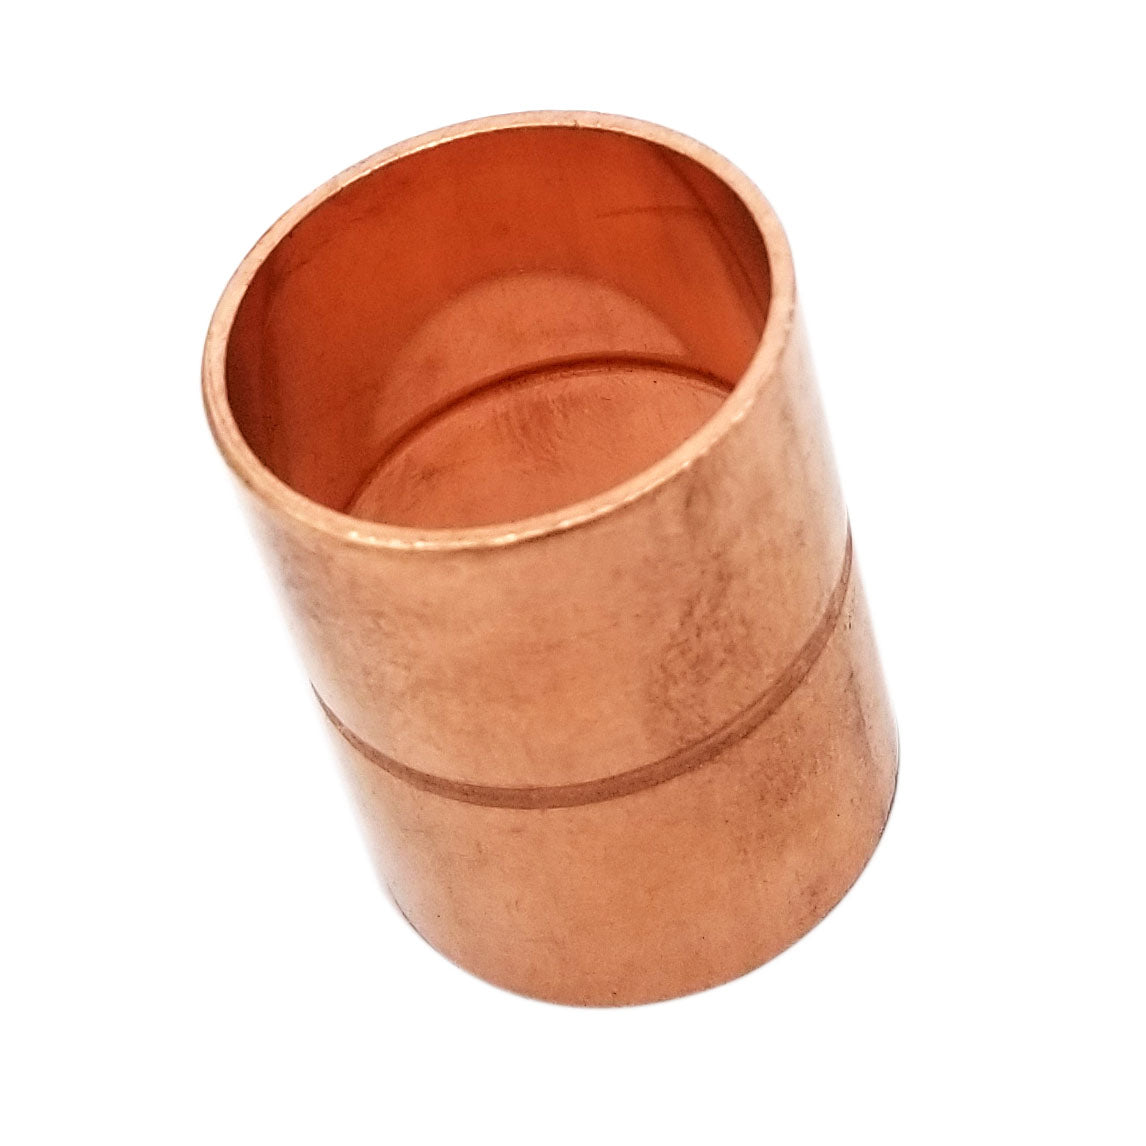 Copper Fitting 7/8 Inch (HVAC Outer Dimension) 3/4 Inch (Plumbing Inner Dimension) - Straight Copper Coupling Fittings With Rolled Tube Stop & HVAC – 99.9% Pure Copper - 5 Pack